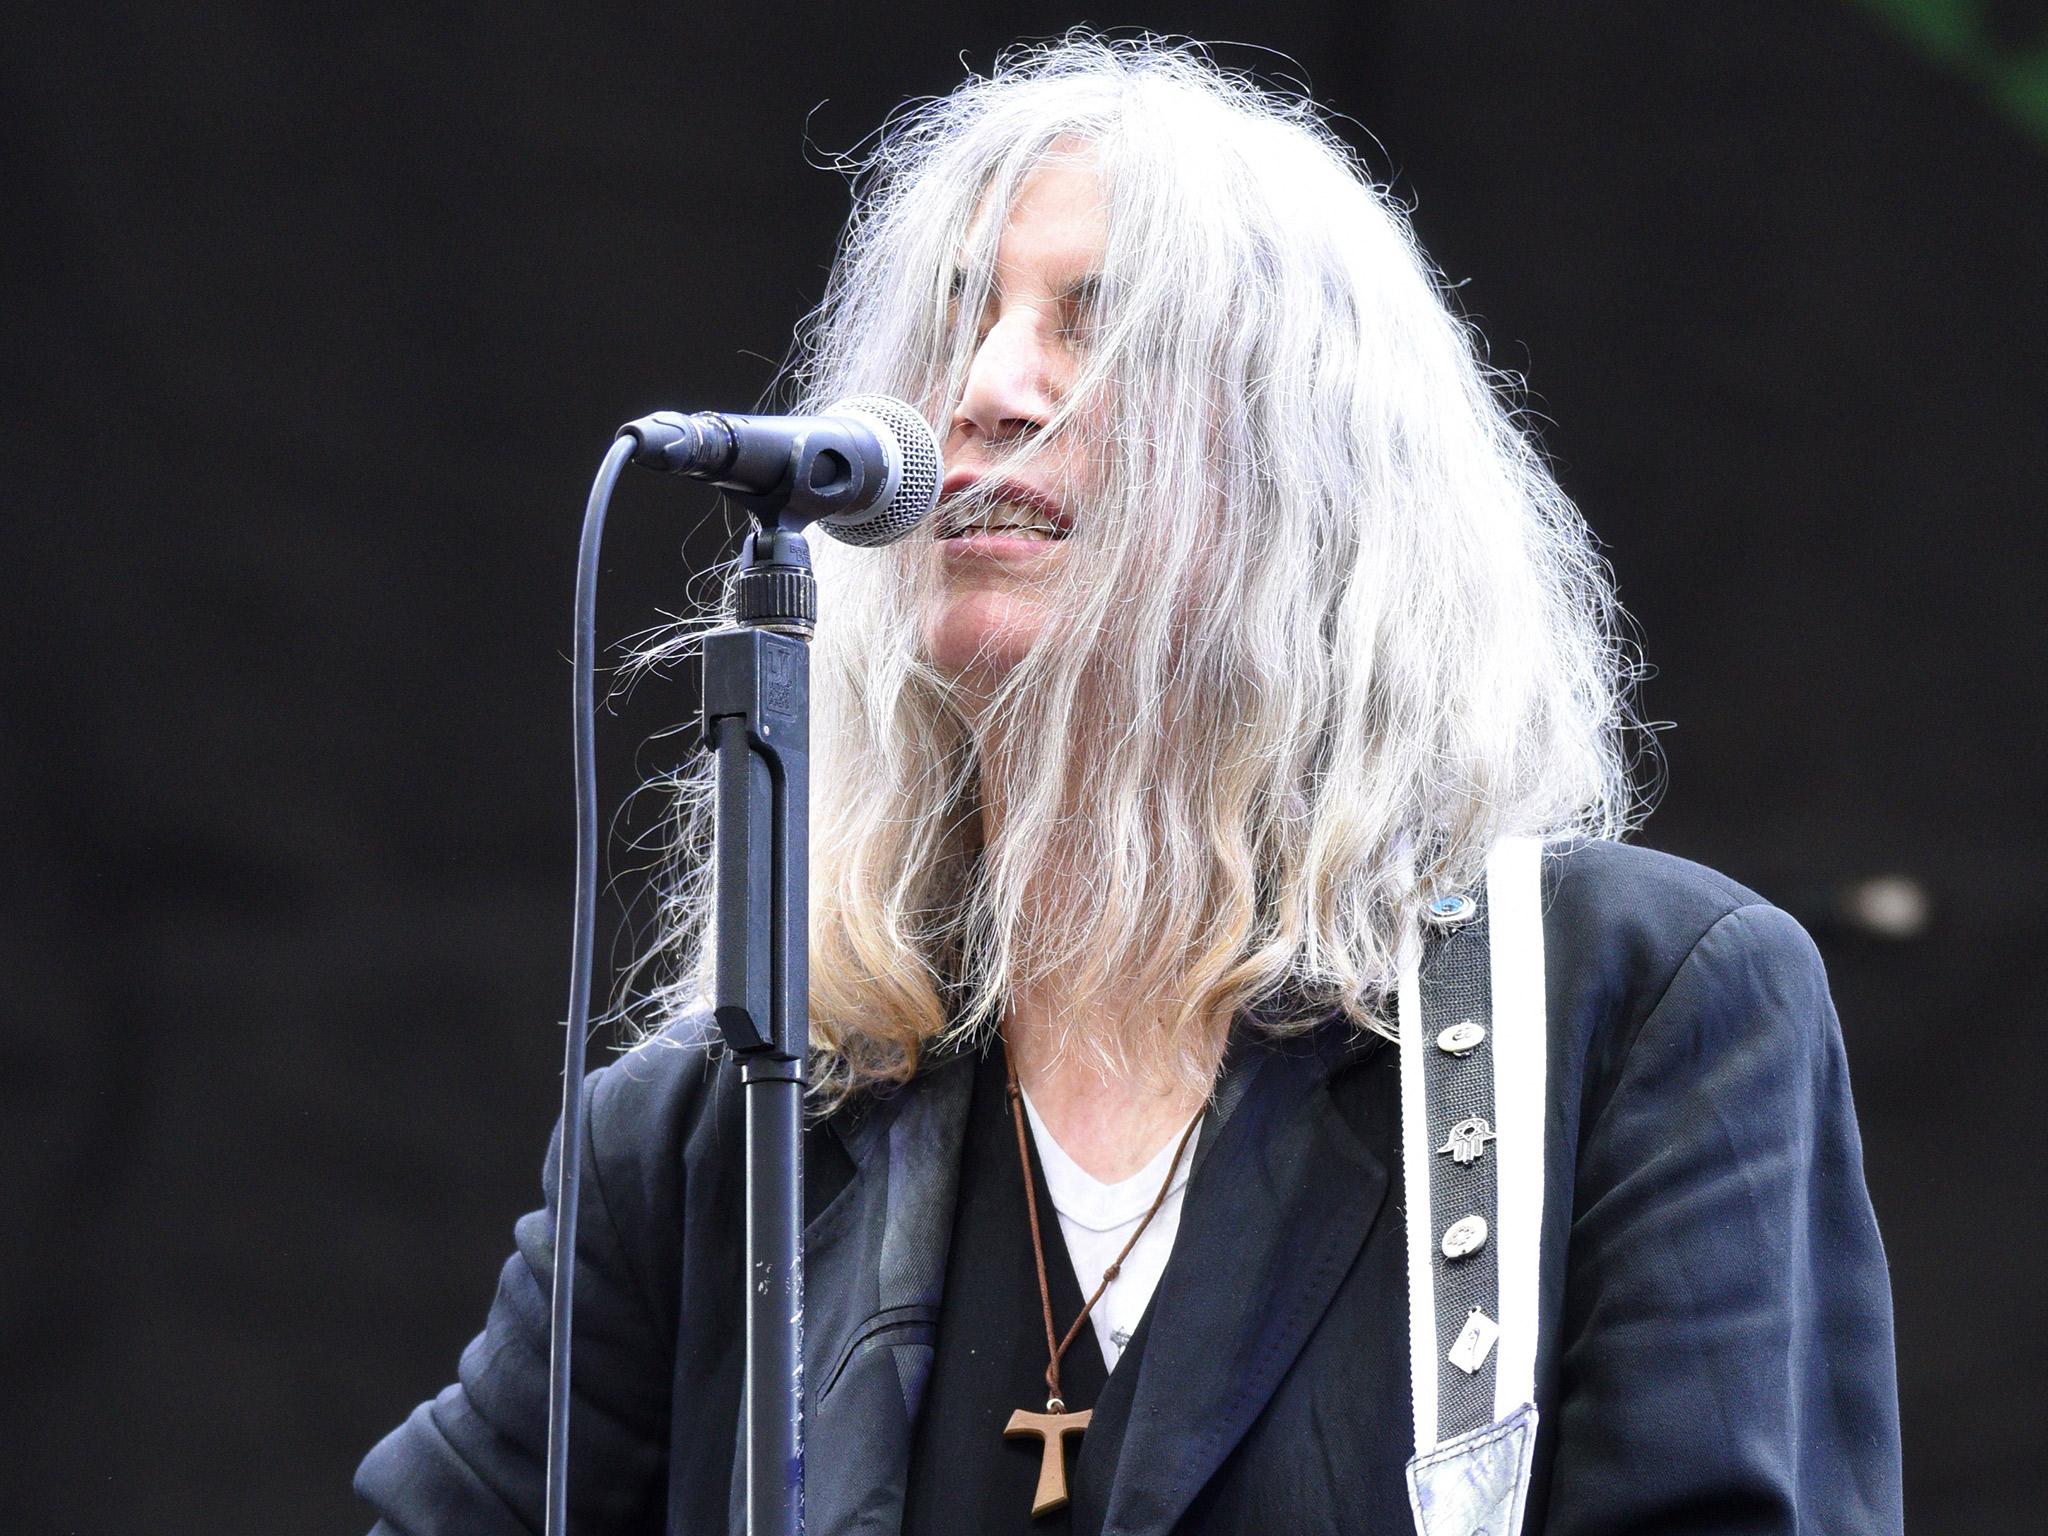 Patti Smith performed at Glastonbury earlier this summer